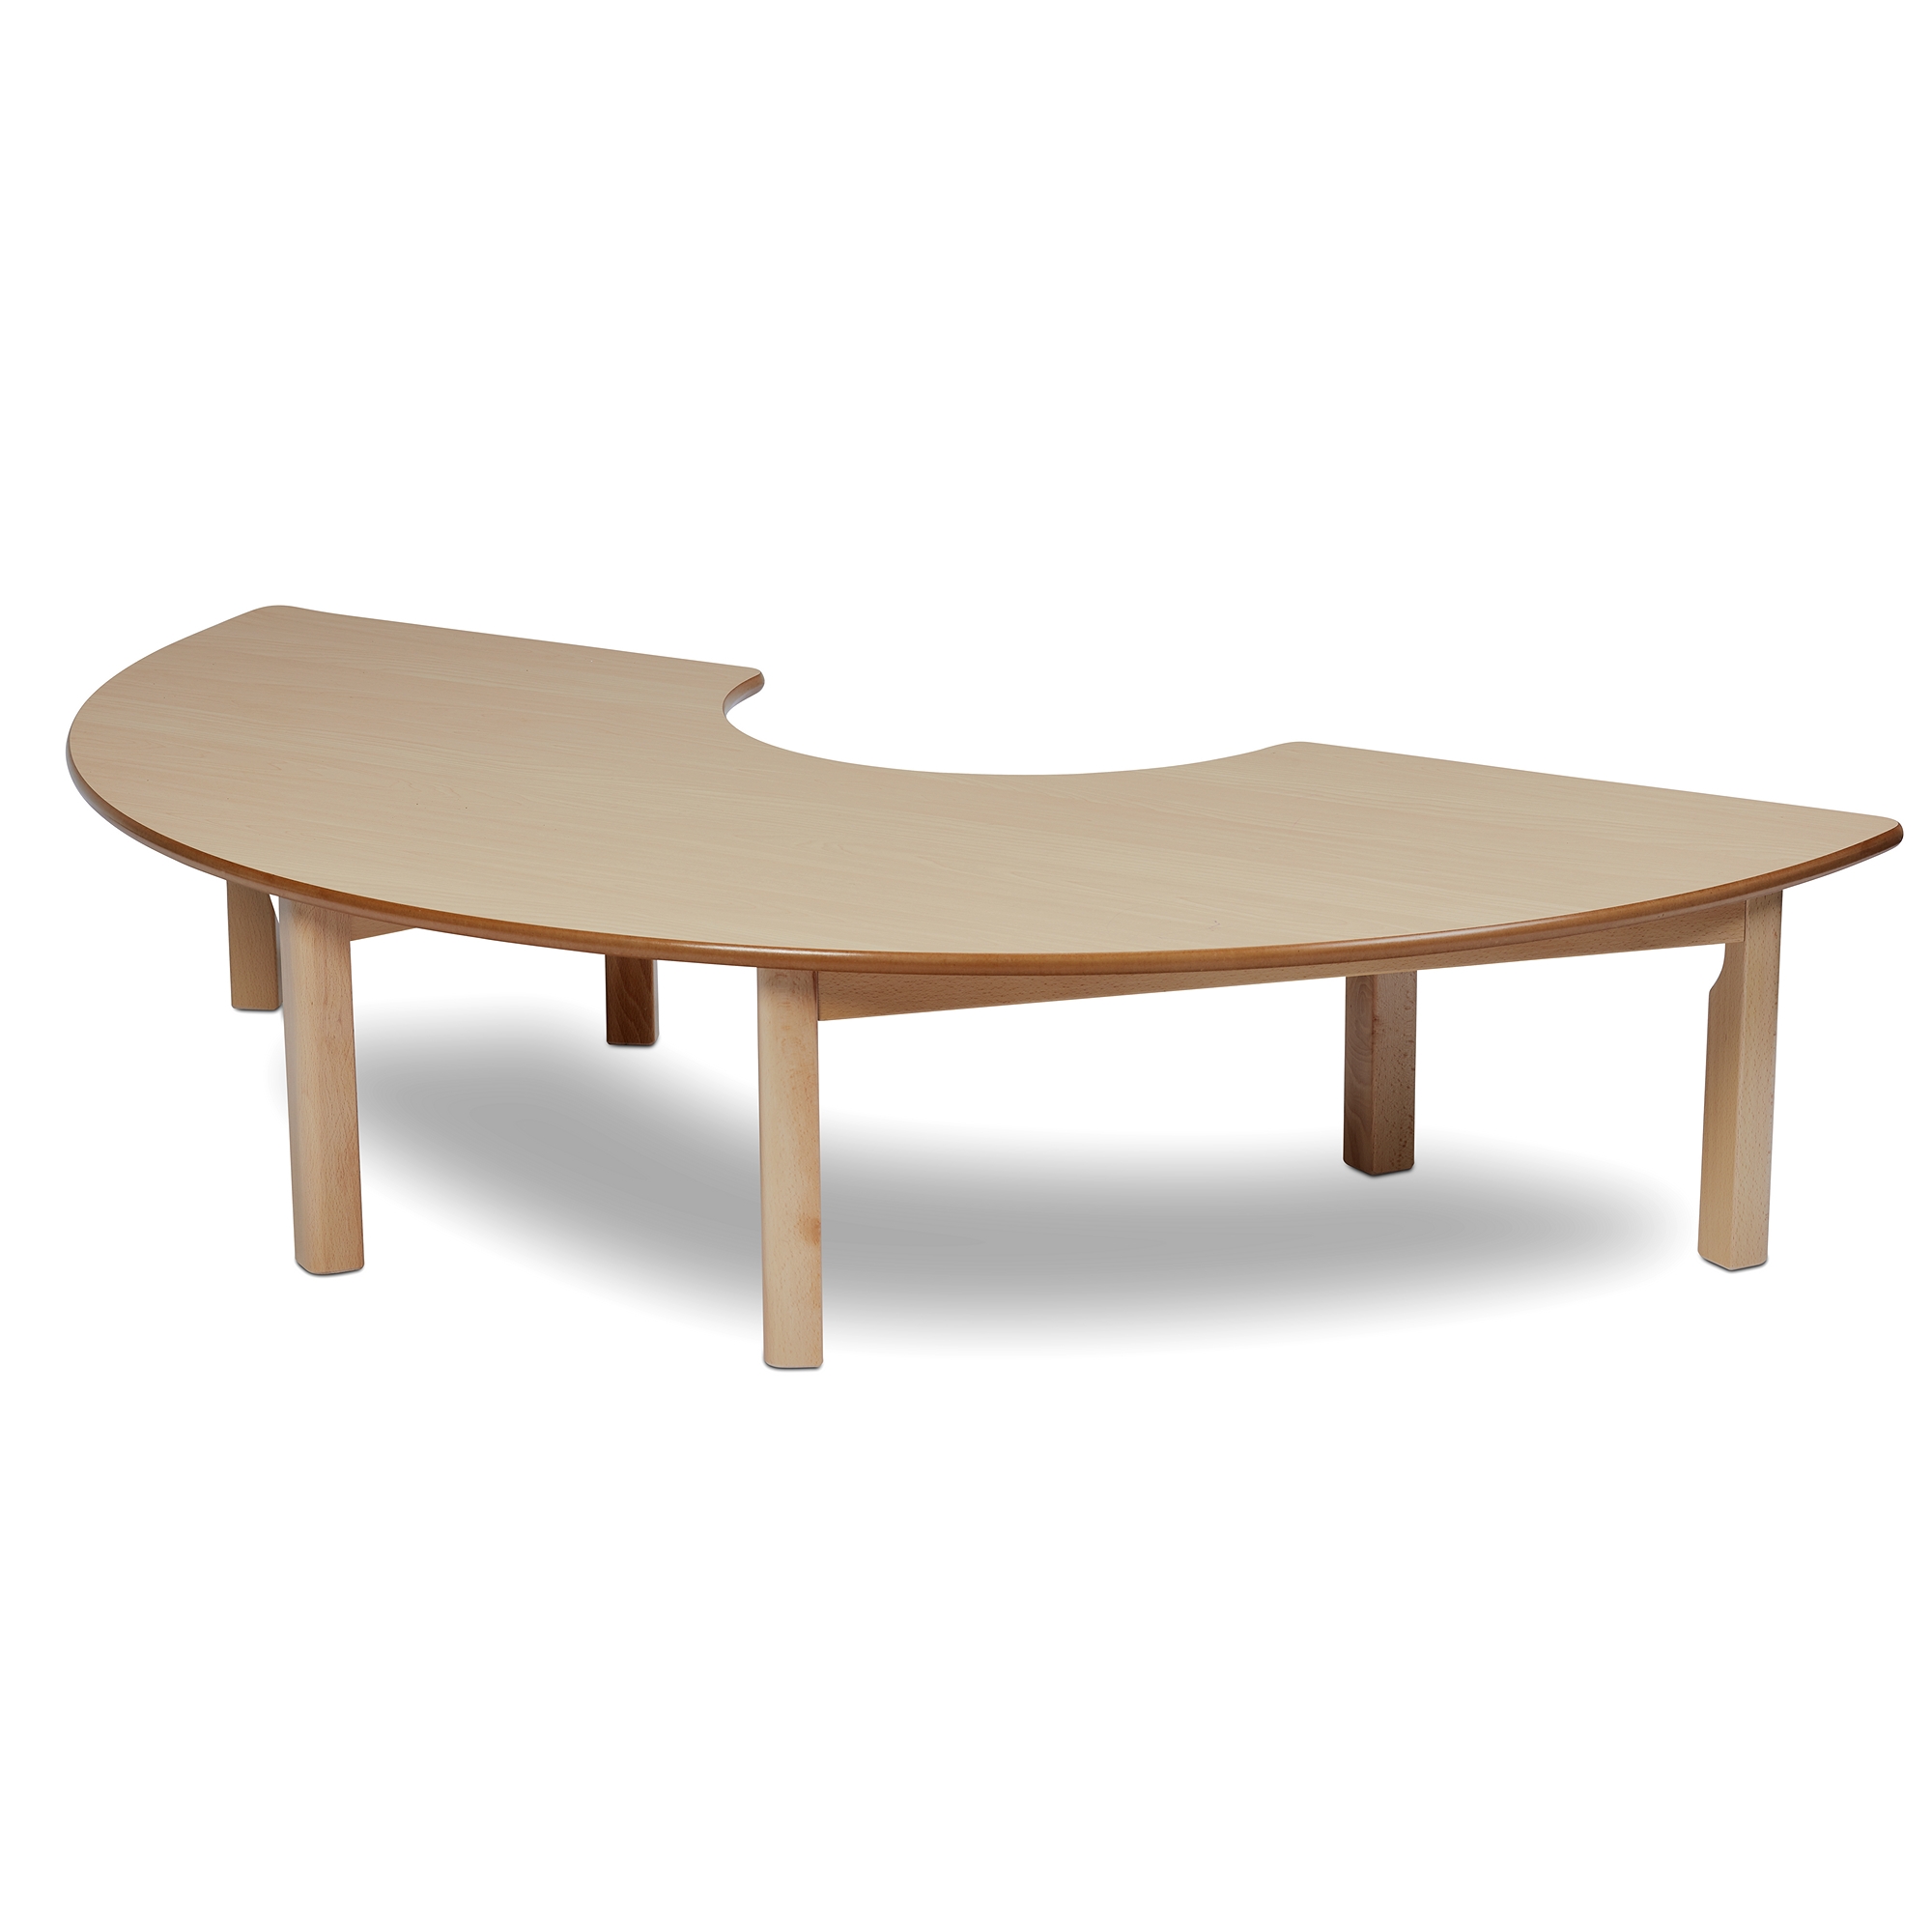 Playscapes Semi Circle Table - 320mm Height